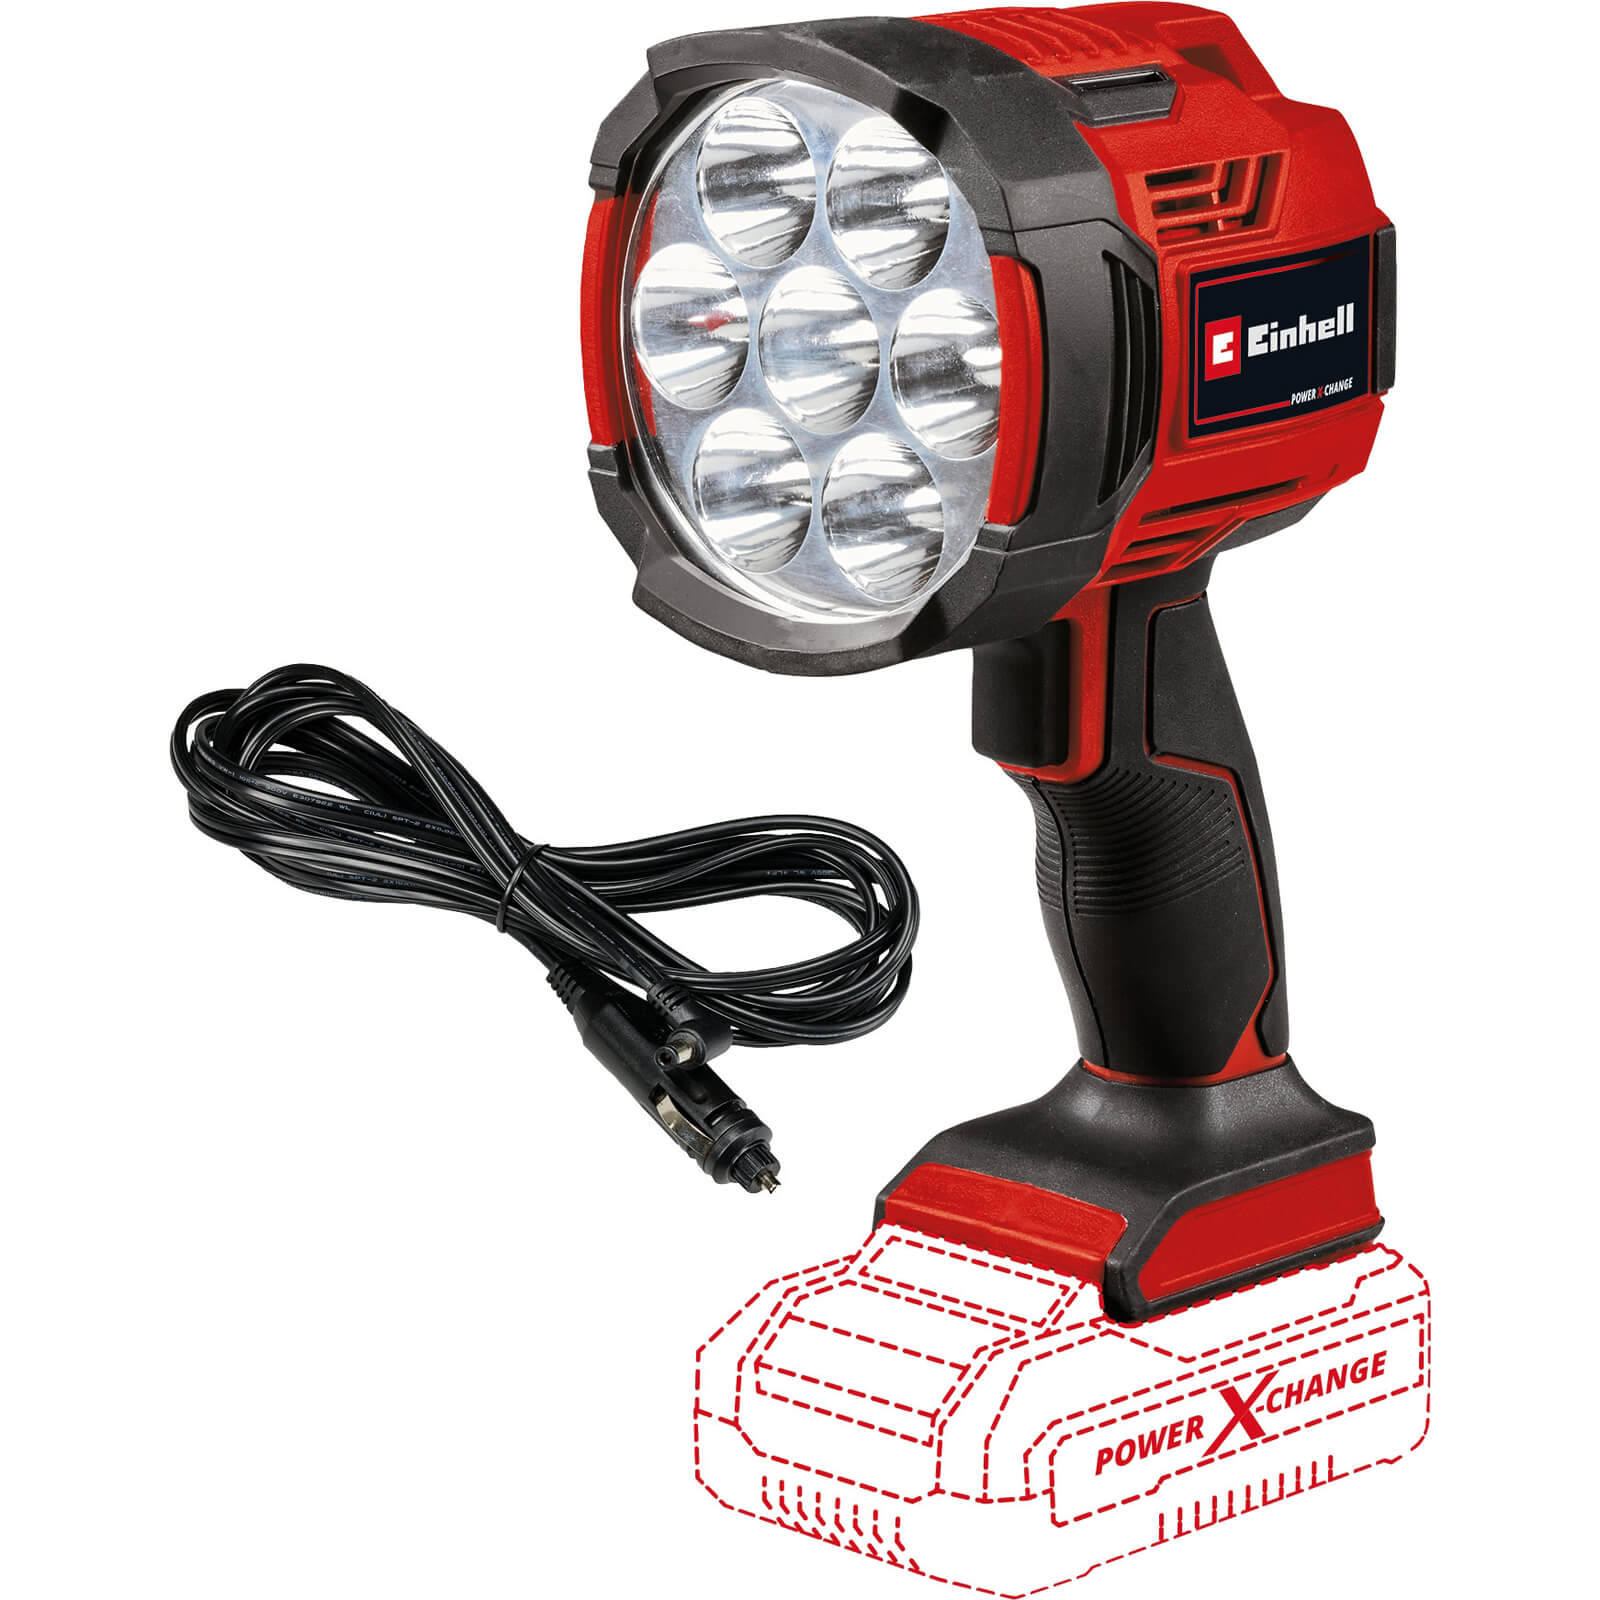 Image of Einhell TE-CL 18/2500 LiAC 18v Cordless / 12v Hybrid Searchlight Torch No Batteries No Charger No Case